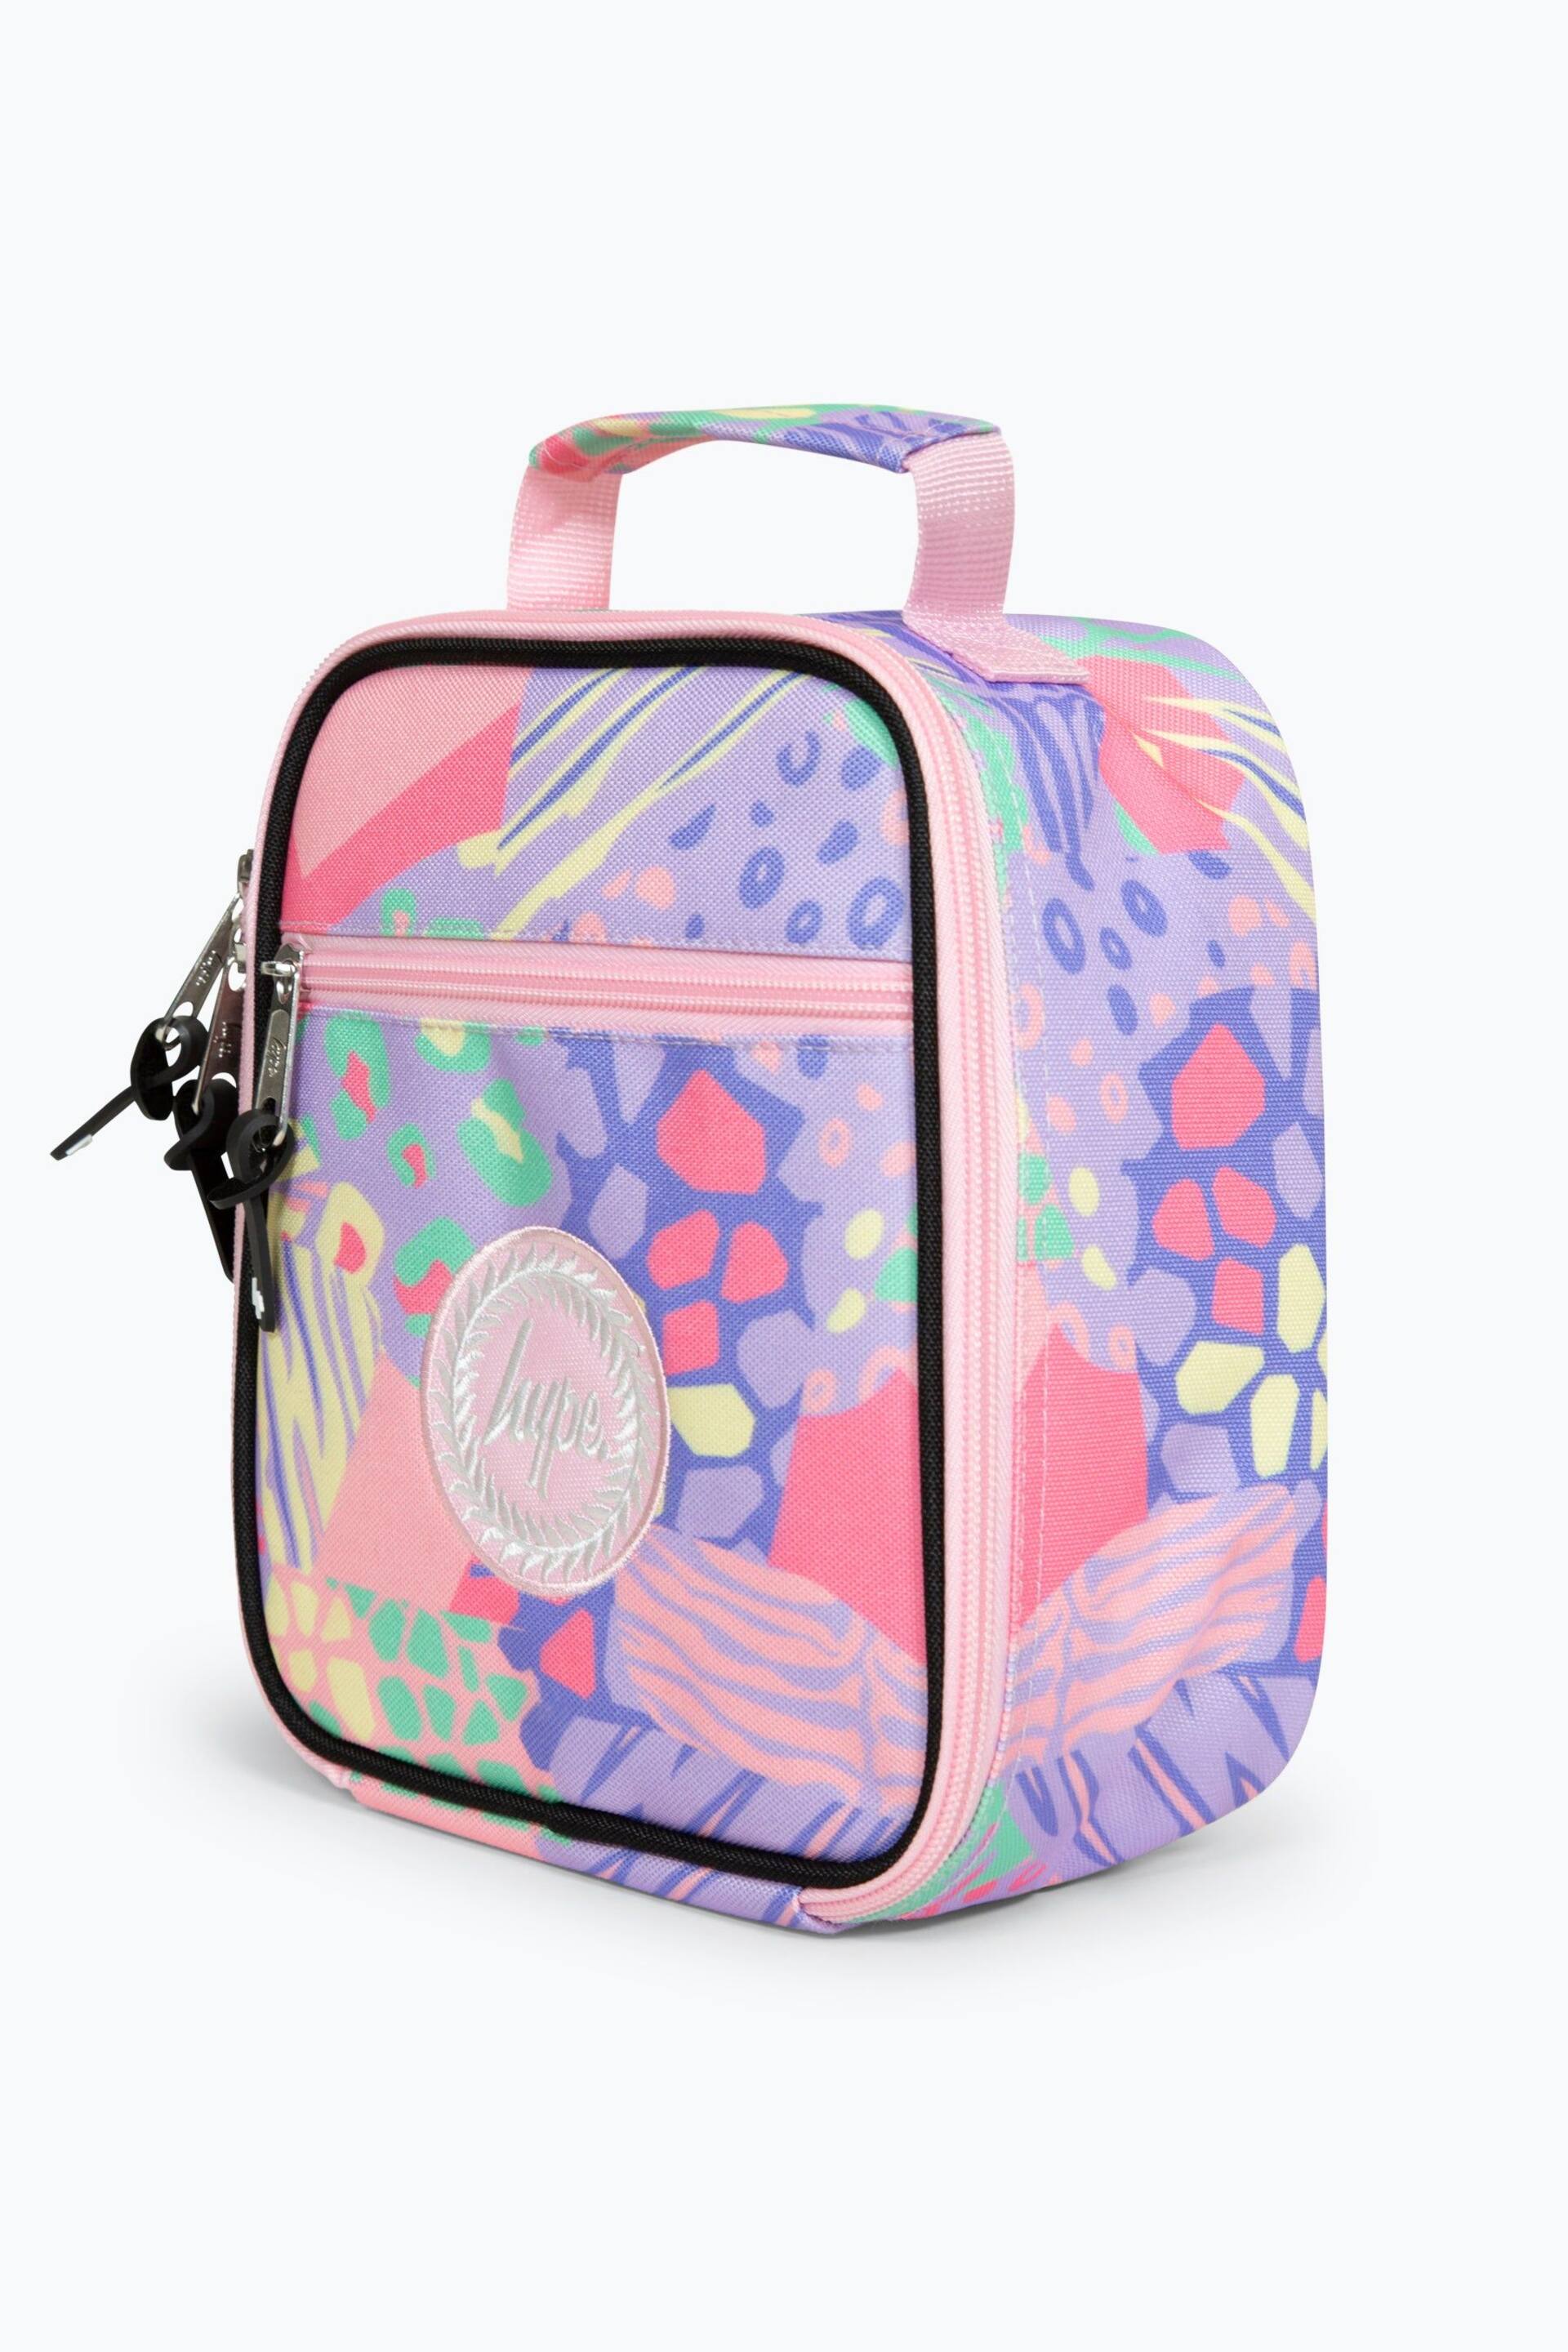 Hype. Multi Pastel Prints Lunch Box - Image 5 of 9